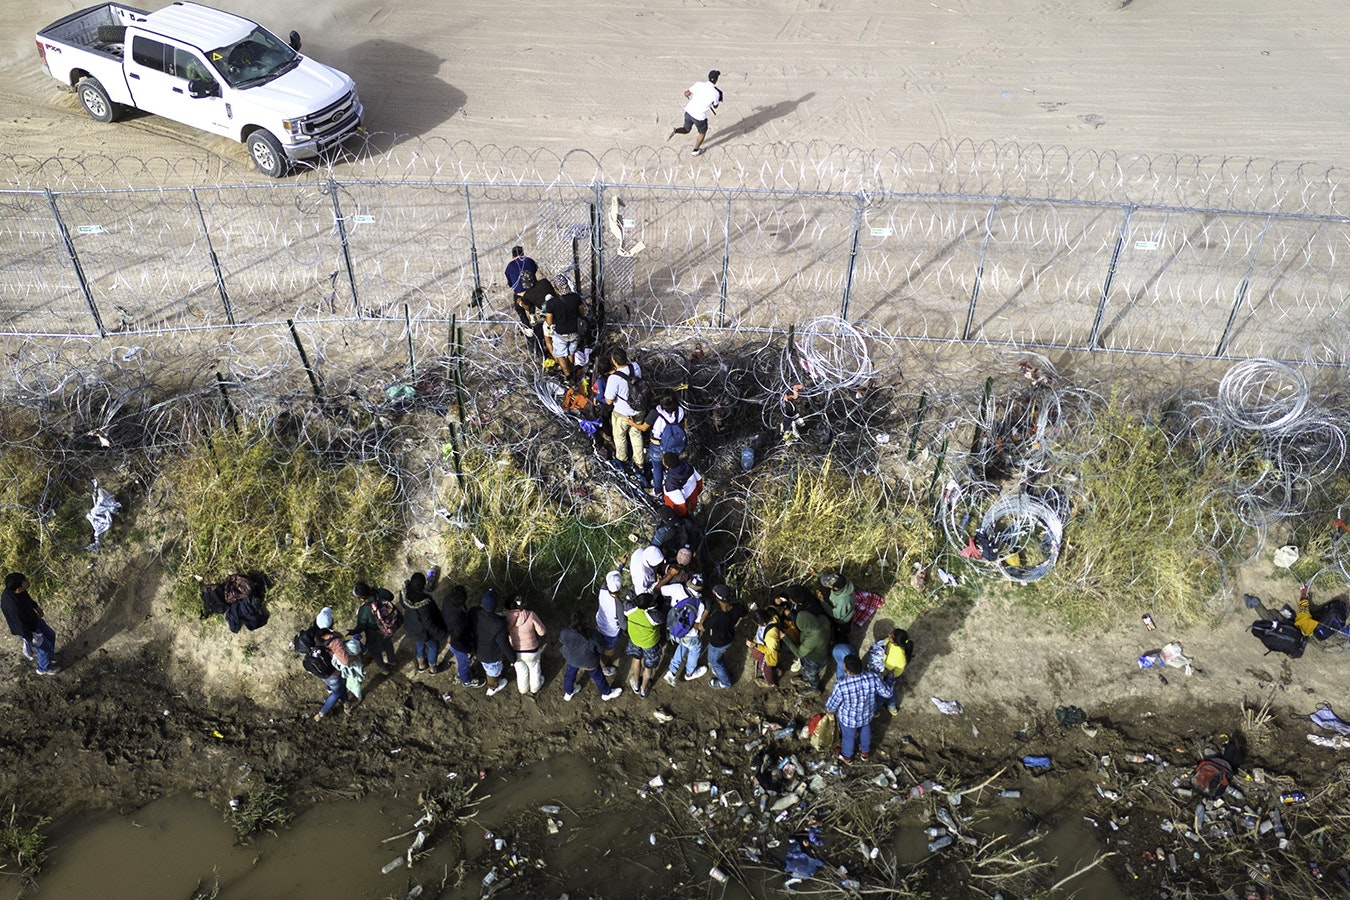 In an aerial view, immigrants pass through coils of razor wire while crossing the U.S.-Mexico border on March 13, 2024, in El Paso, Texas. The wire was placed by the troops as part of Texas Gov. Greg Abbott's "Operation Lone Star" to deter migrants from crossing into Texas.